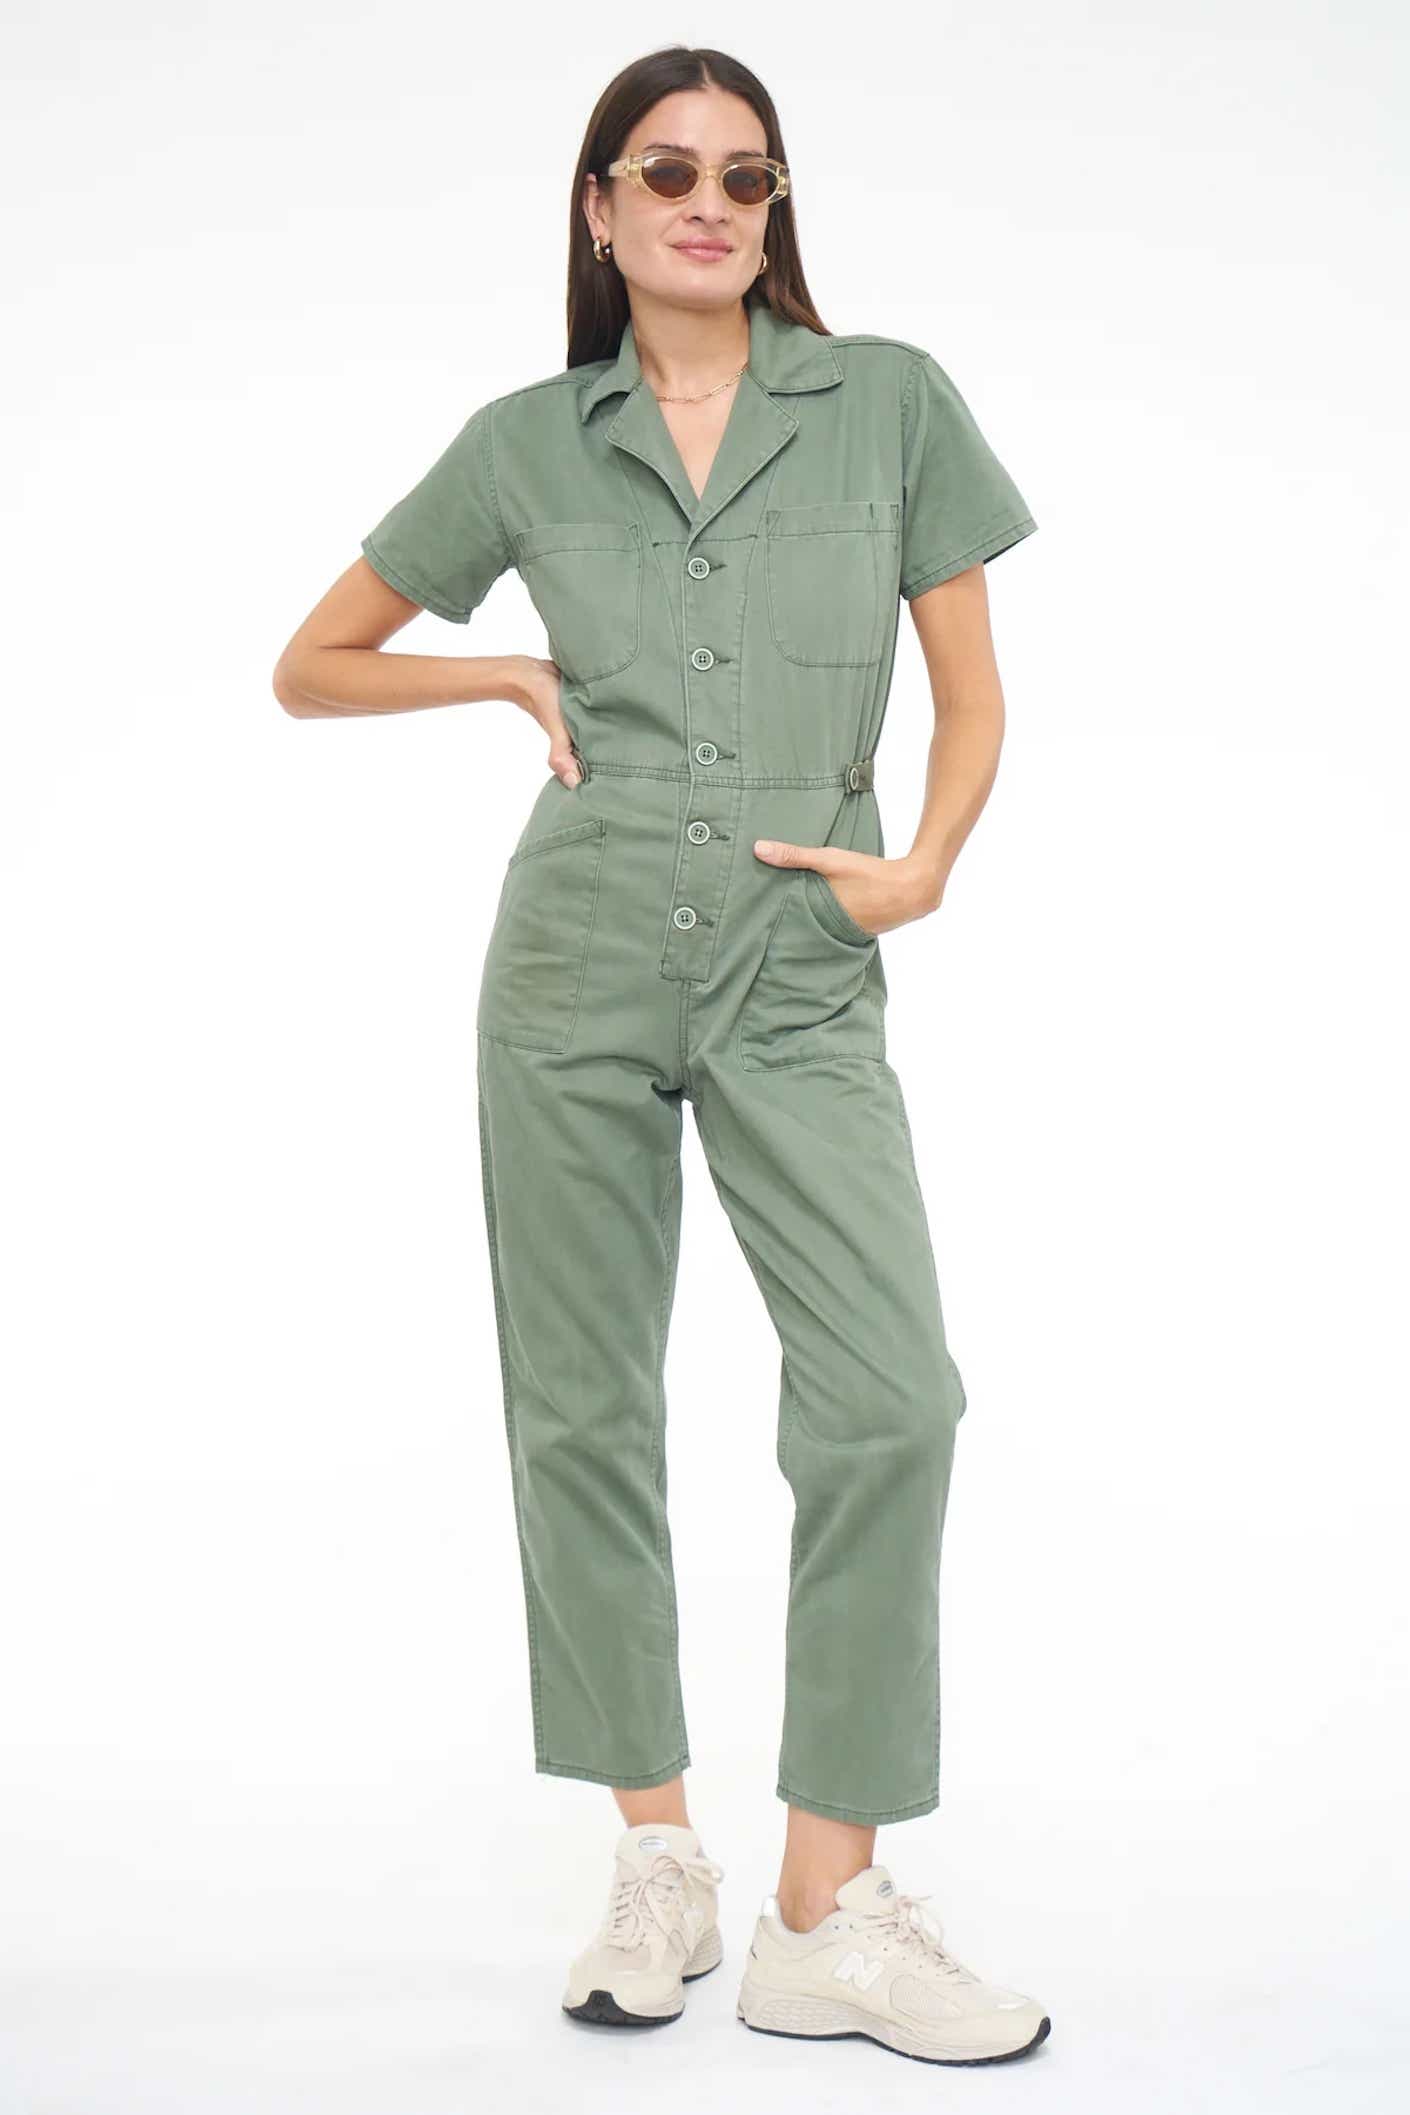 a woman poses in a jumpsuit